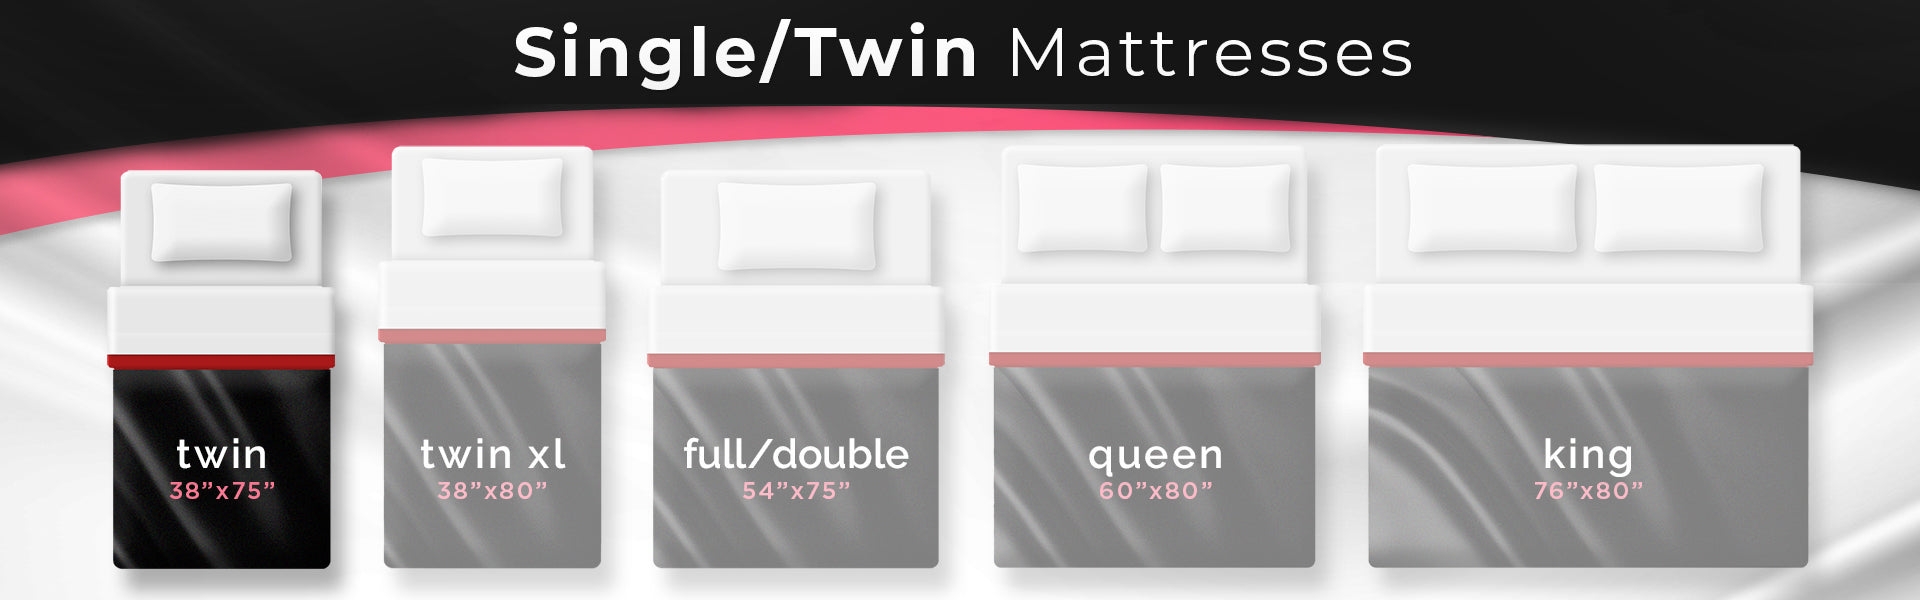 5 illustrated mattresses , single/twin size mattress dimensions highlighted 